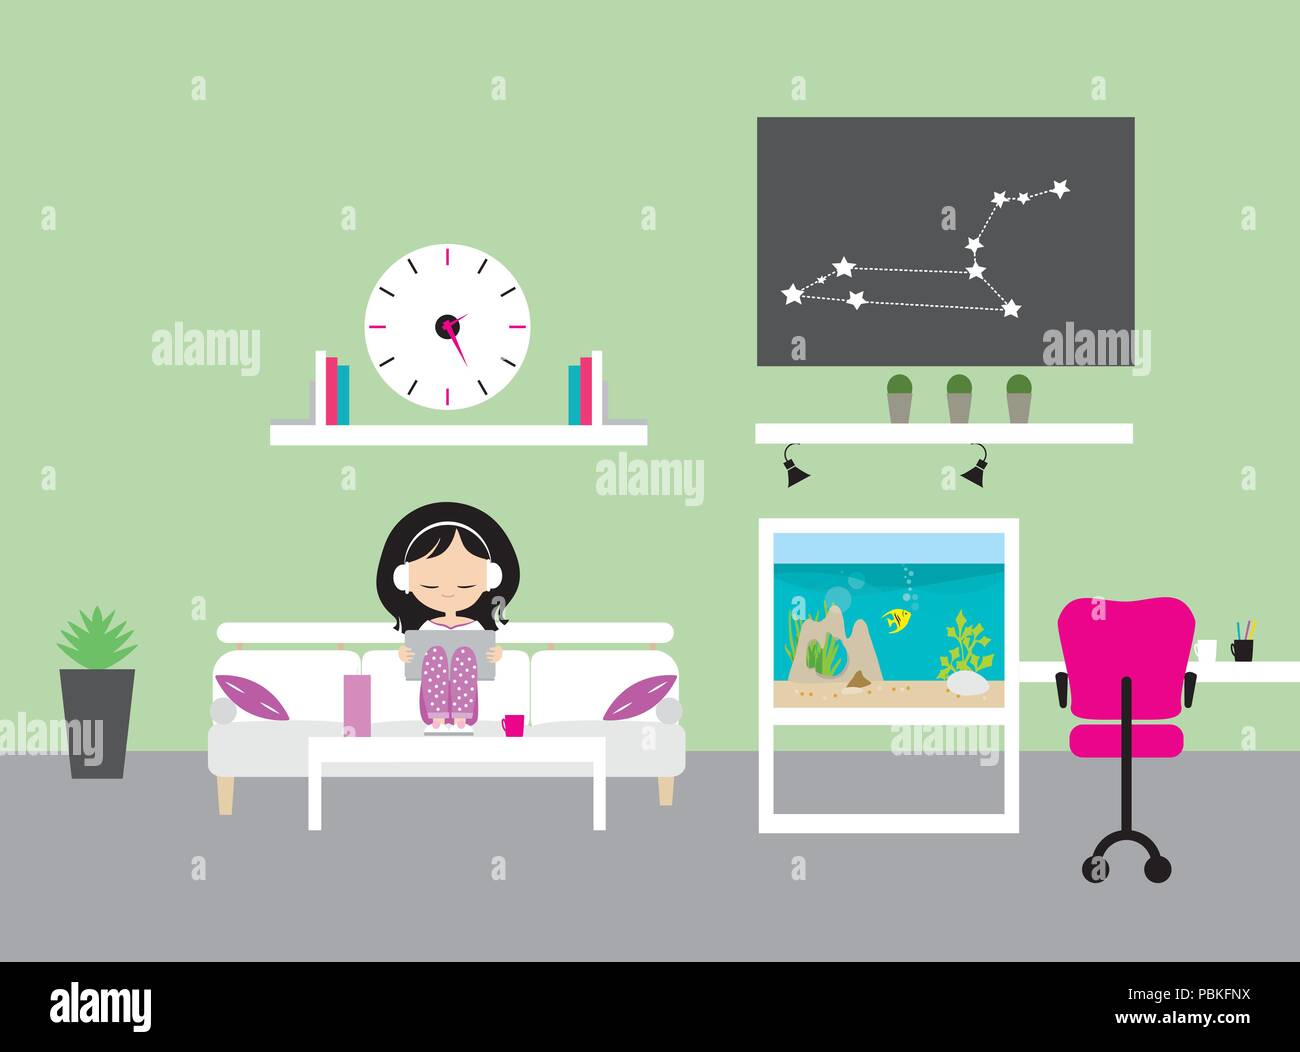 Young girl with headphones and laptop sitting in a children's room with green walls, aquarium and table, chairs and speakers - vector, flat design Stock Vector